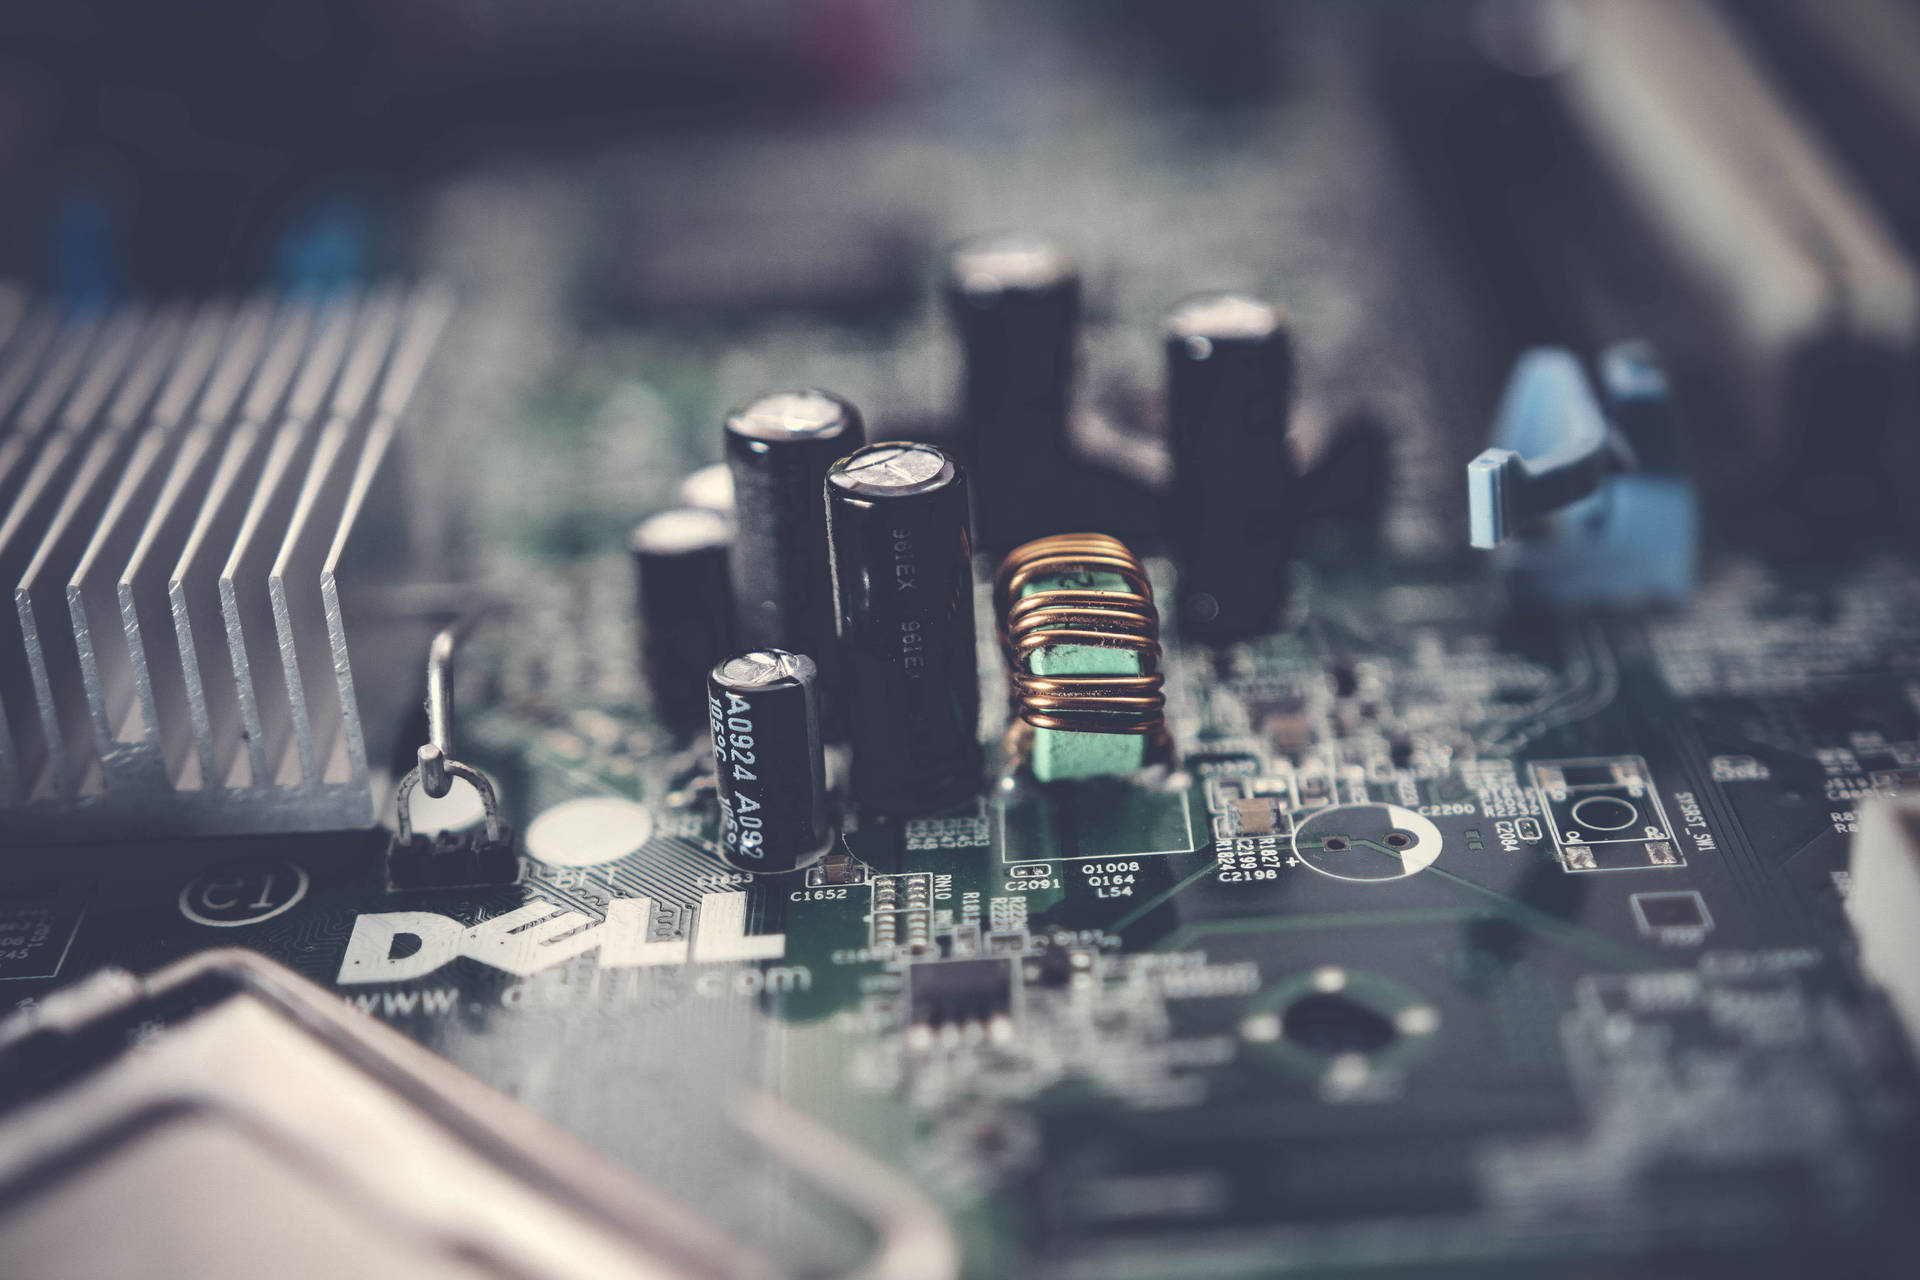 Dell Laptop Motherboard Background